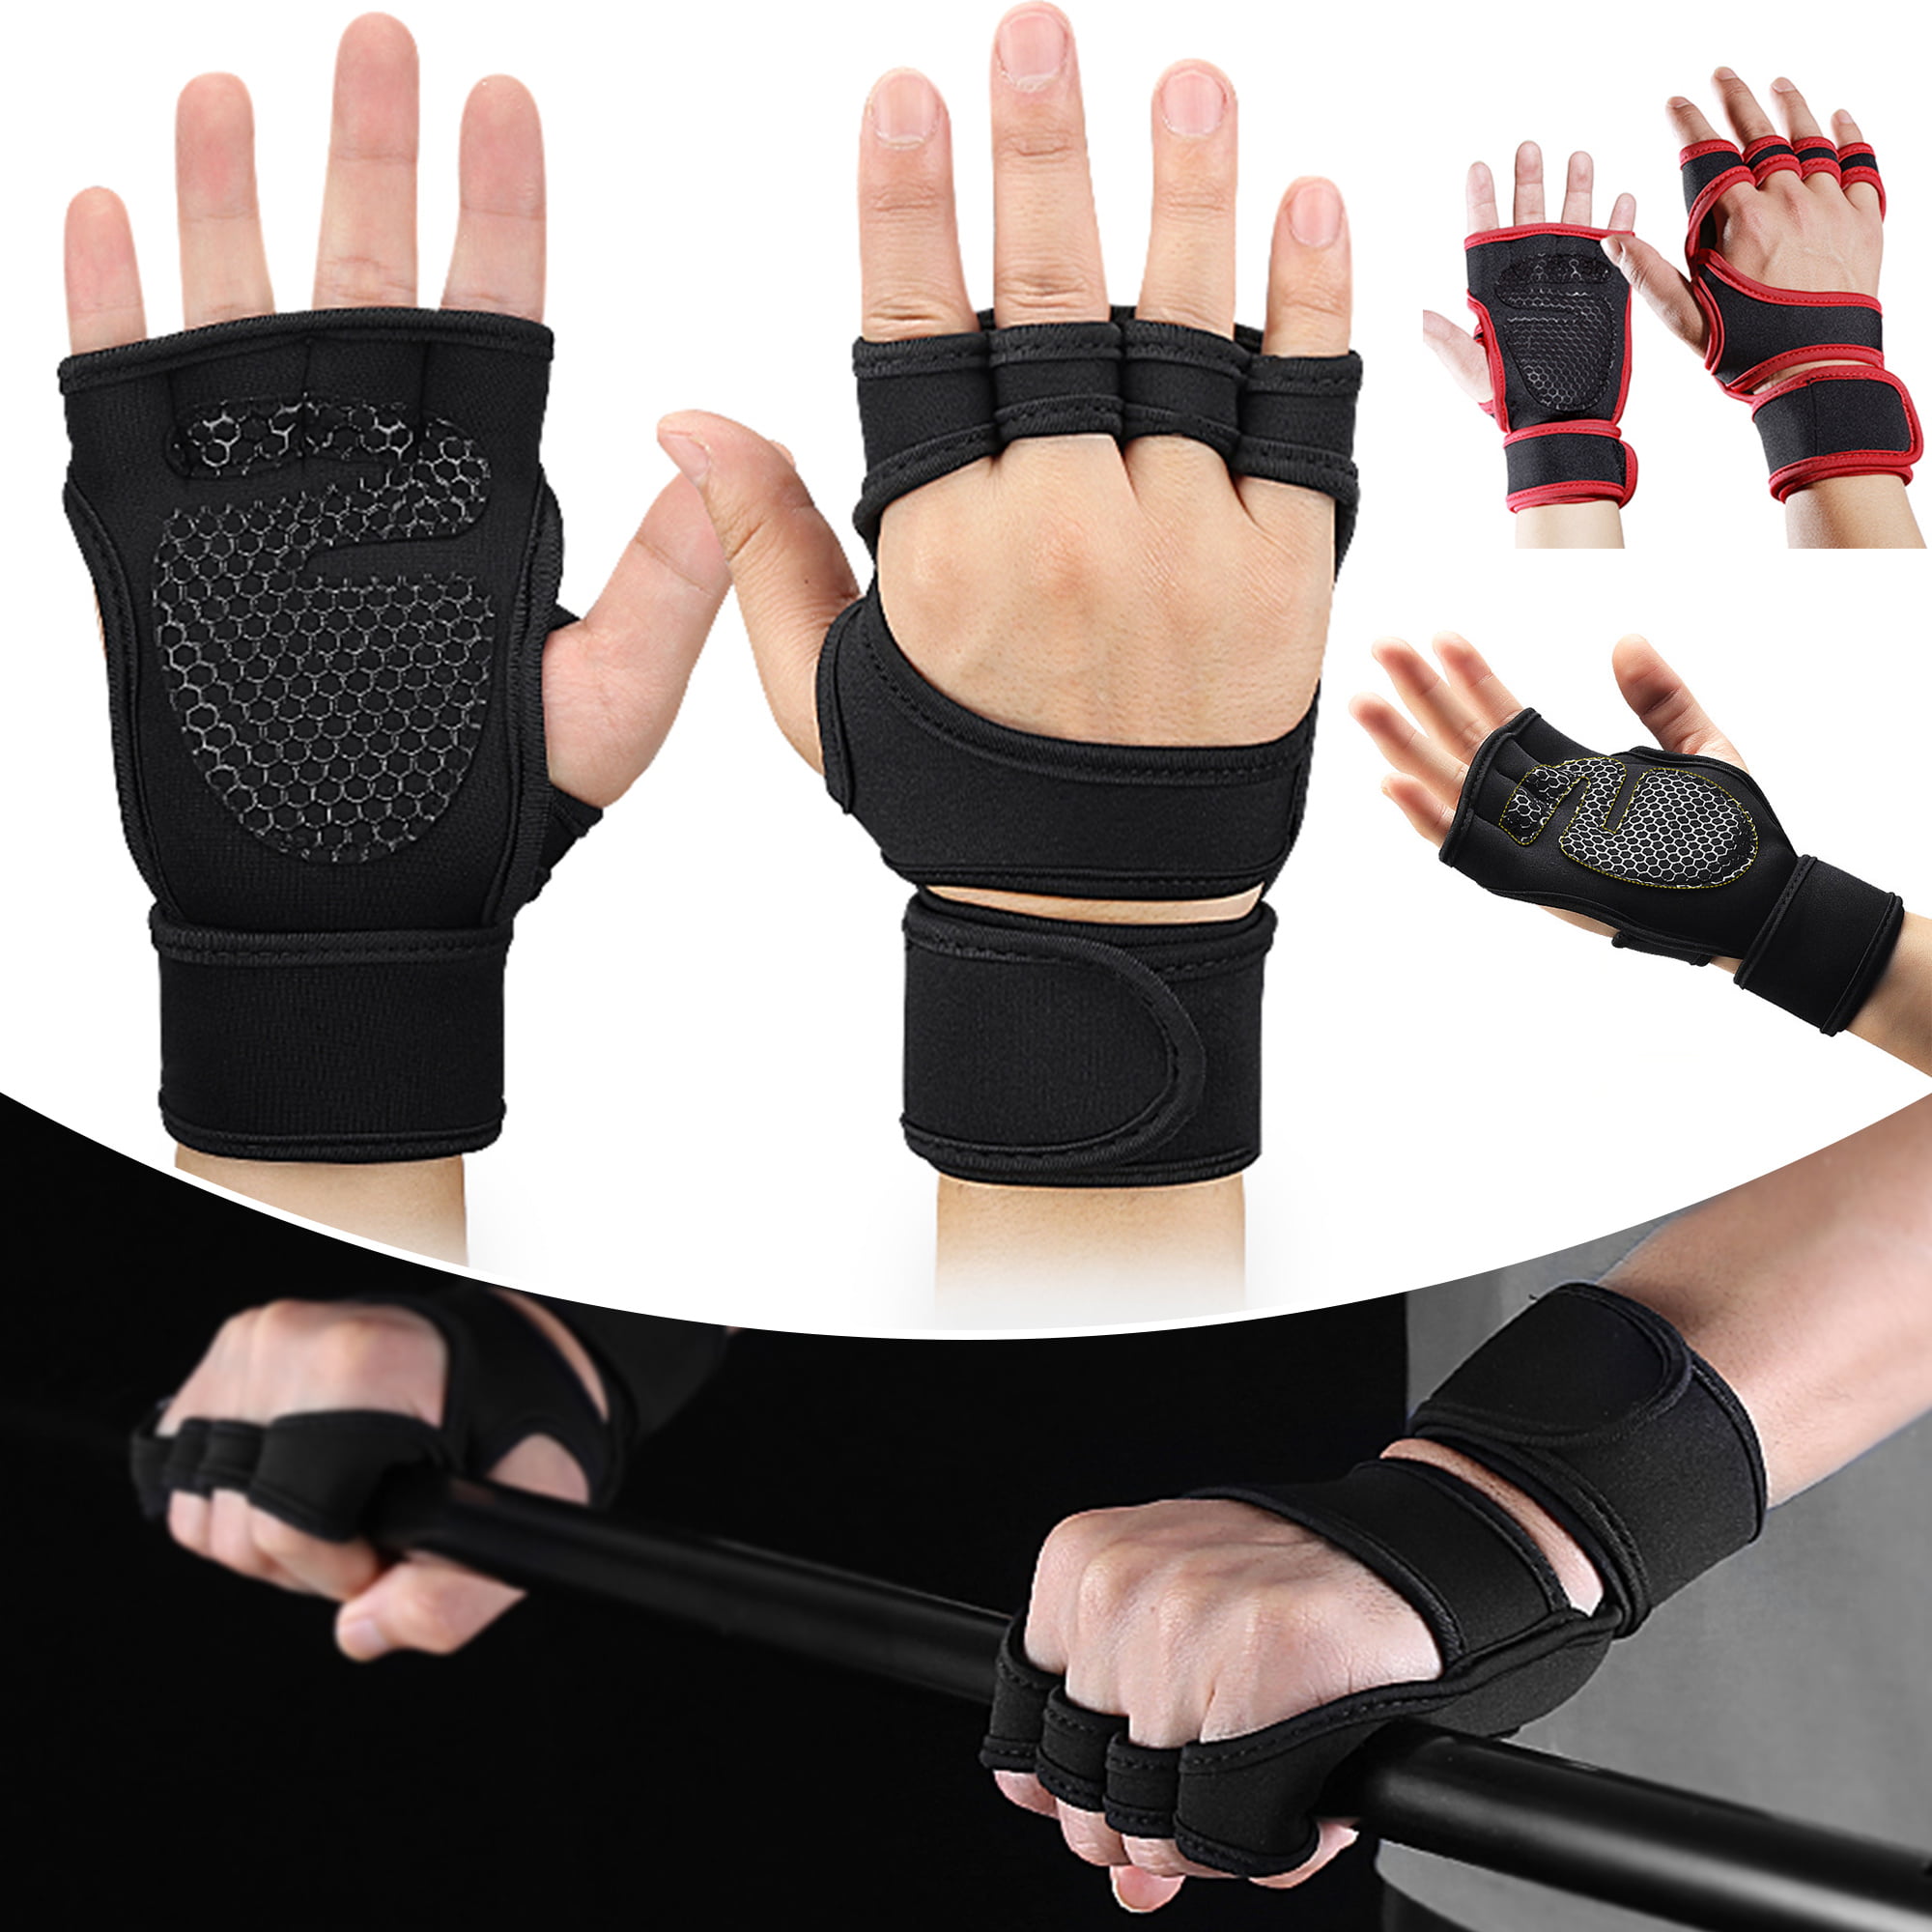 Details about   Women Men Gym Weightlifting Gloves W/ Wrist Wrap Workout Fitness Exercise Train 